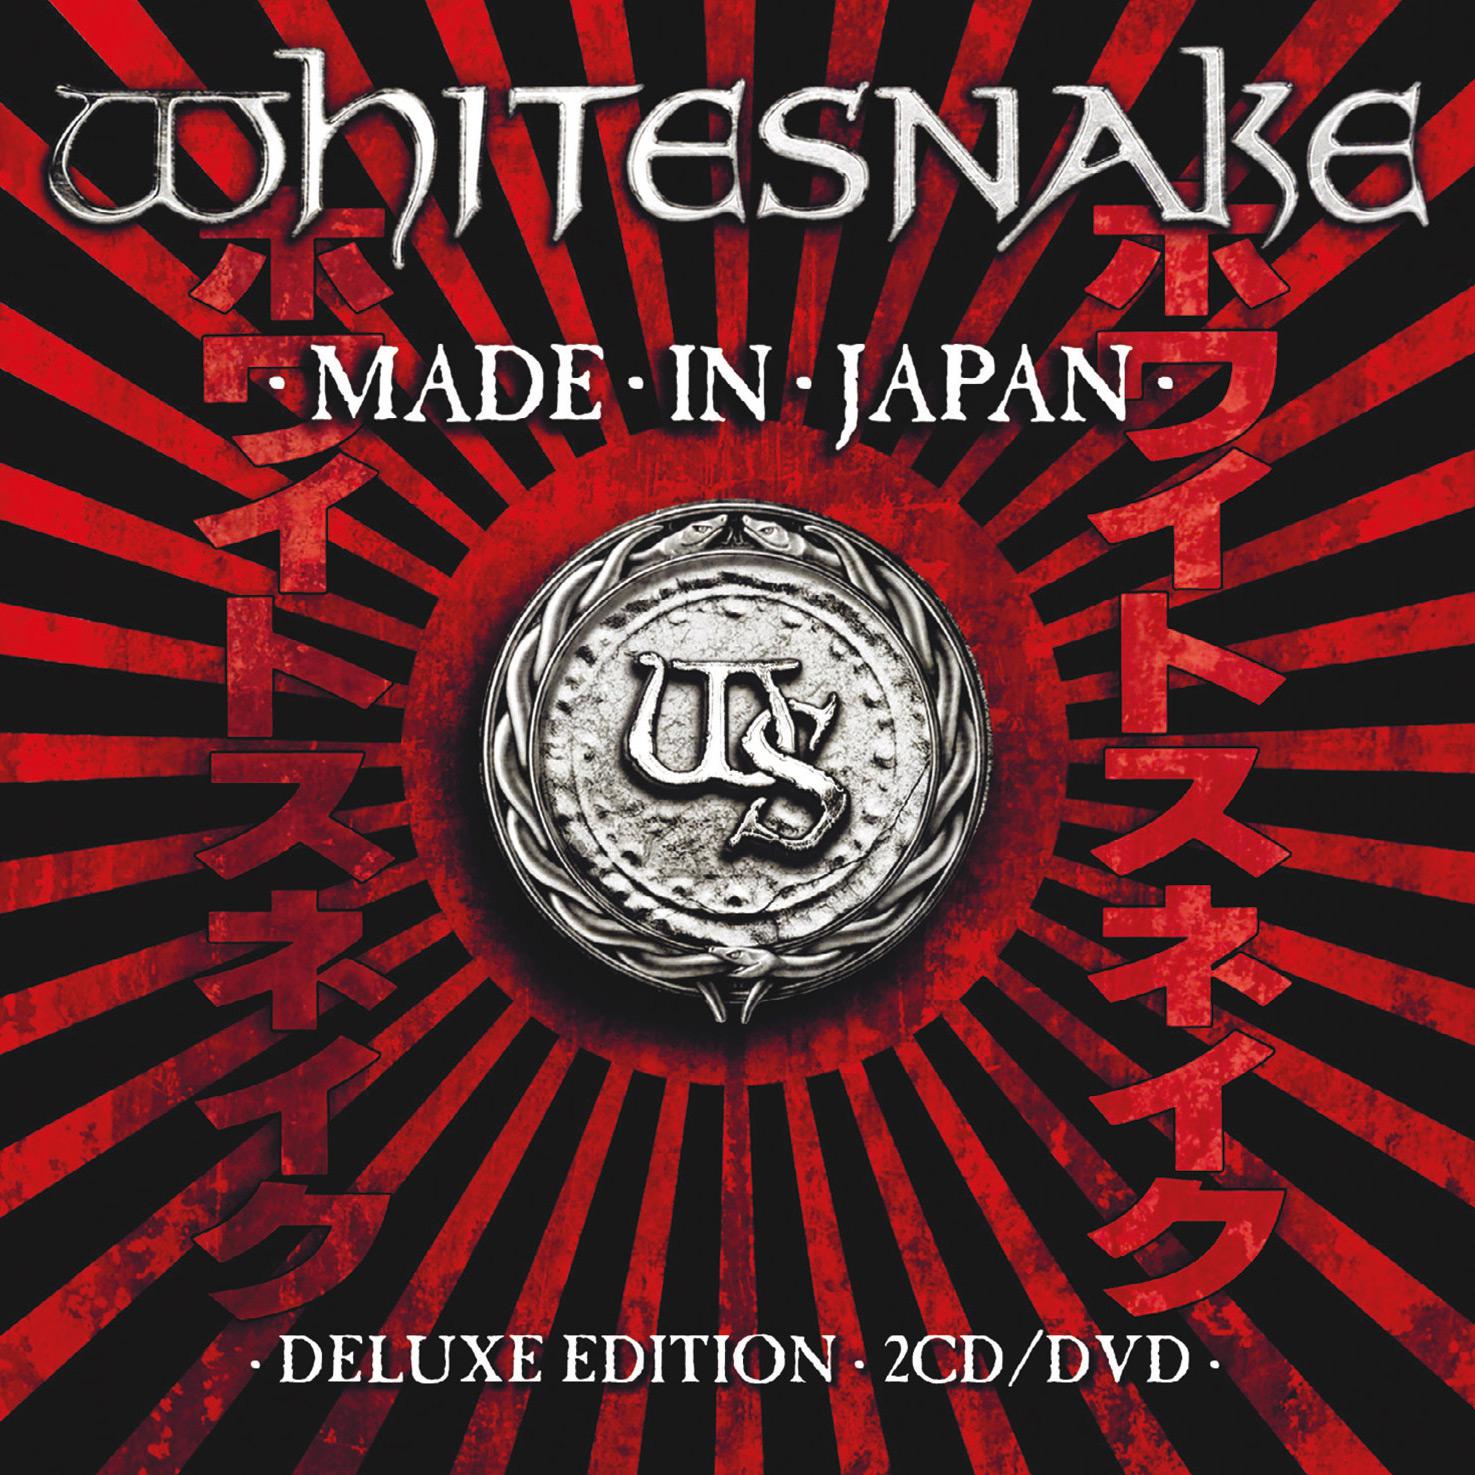 Combo Whitesnake - Made In Japan - Deluxe Edition (DVD+2 CDs) é bom? Vale a pena?